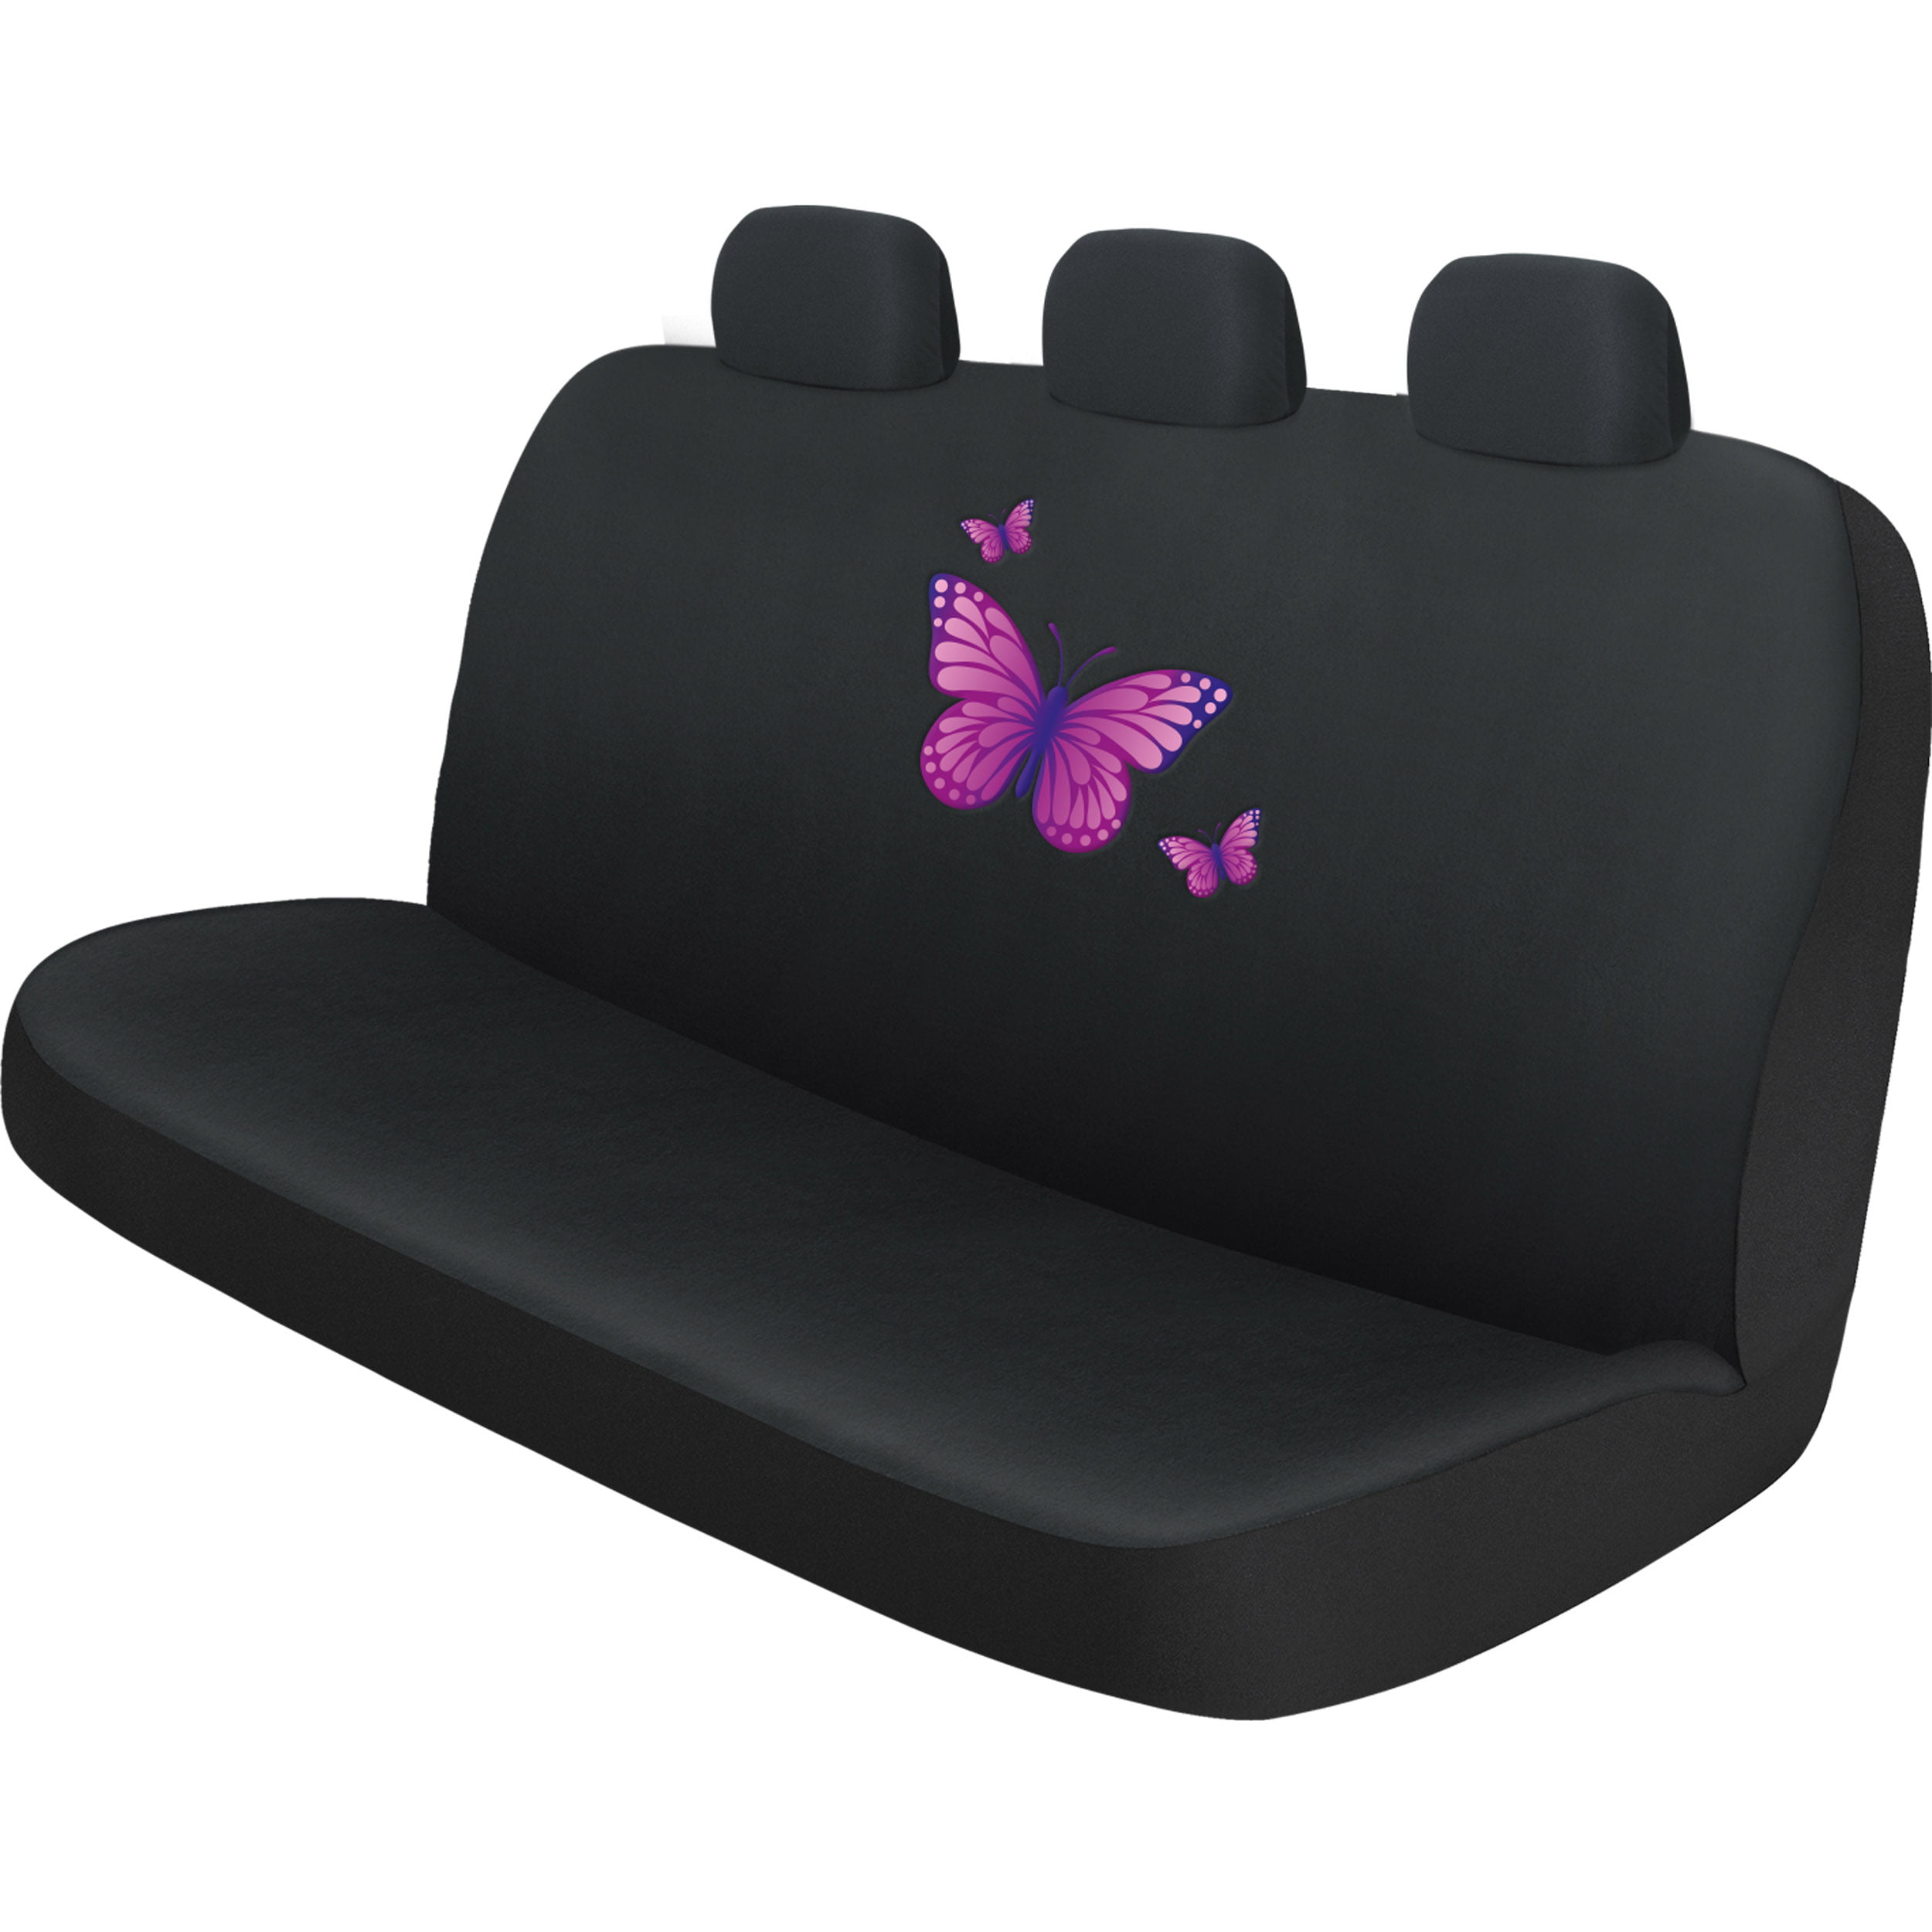 CLOHOMIN Shiny Pink Butterfly Print Car Seat Cover for Women Men Beautiful Animal in Purple Black Front Only Seat Protector Front Seat Only Set of 2 Fit for Most of Car SUV Truck Van Sedan 